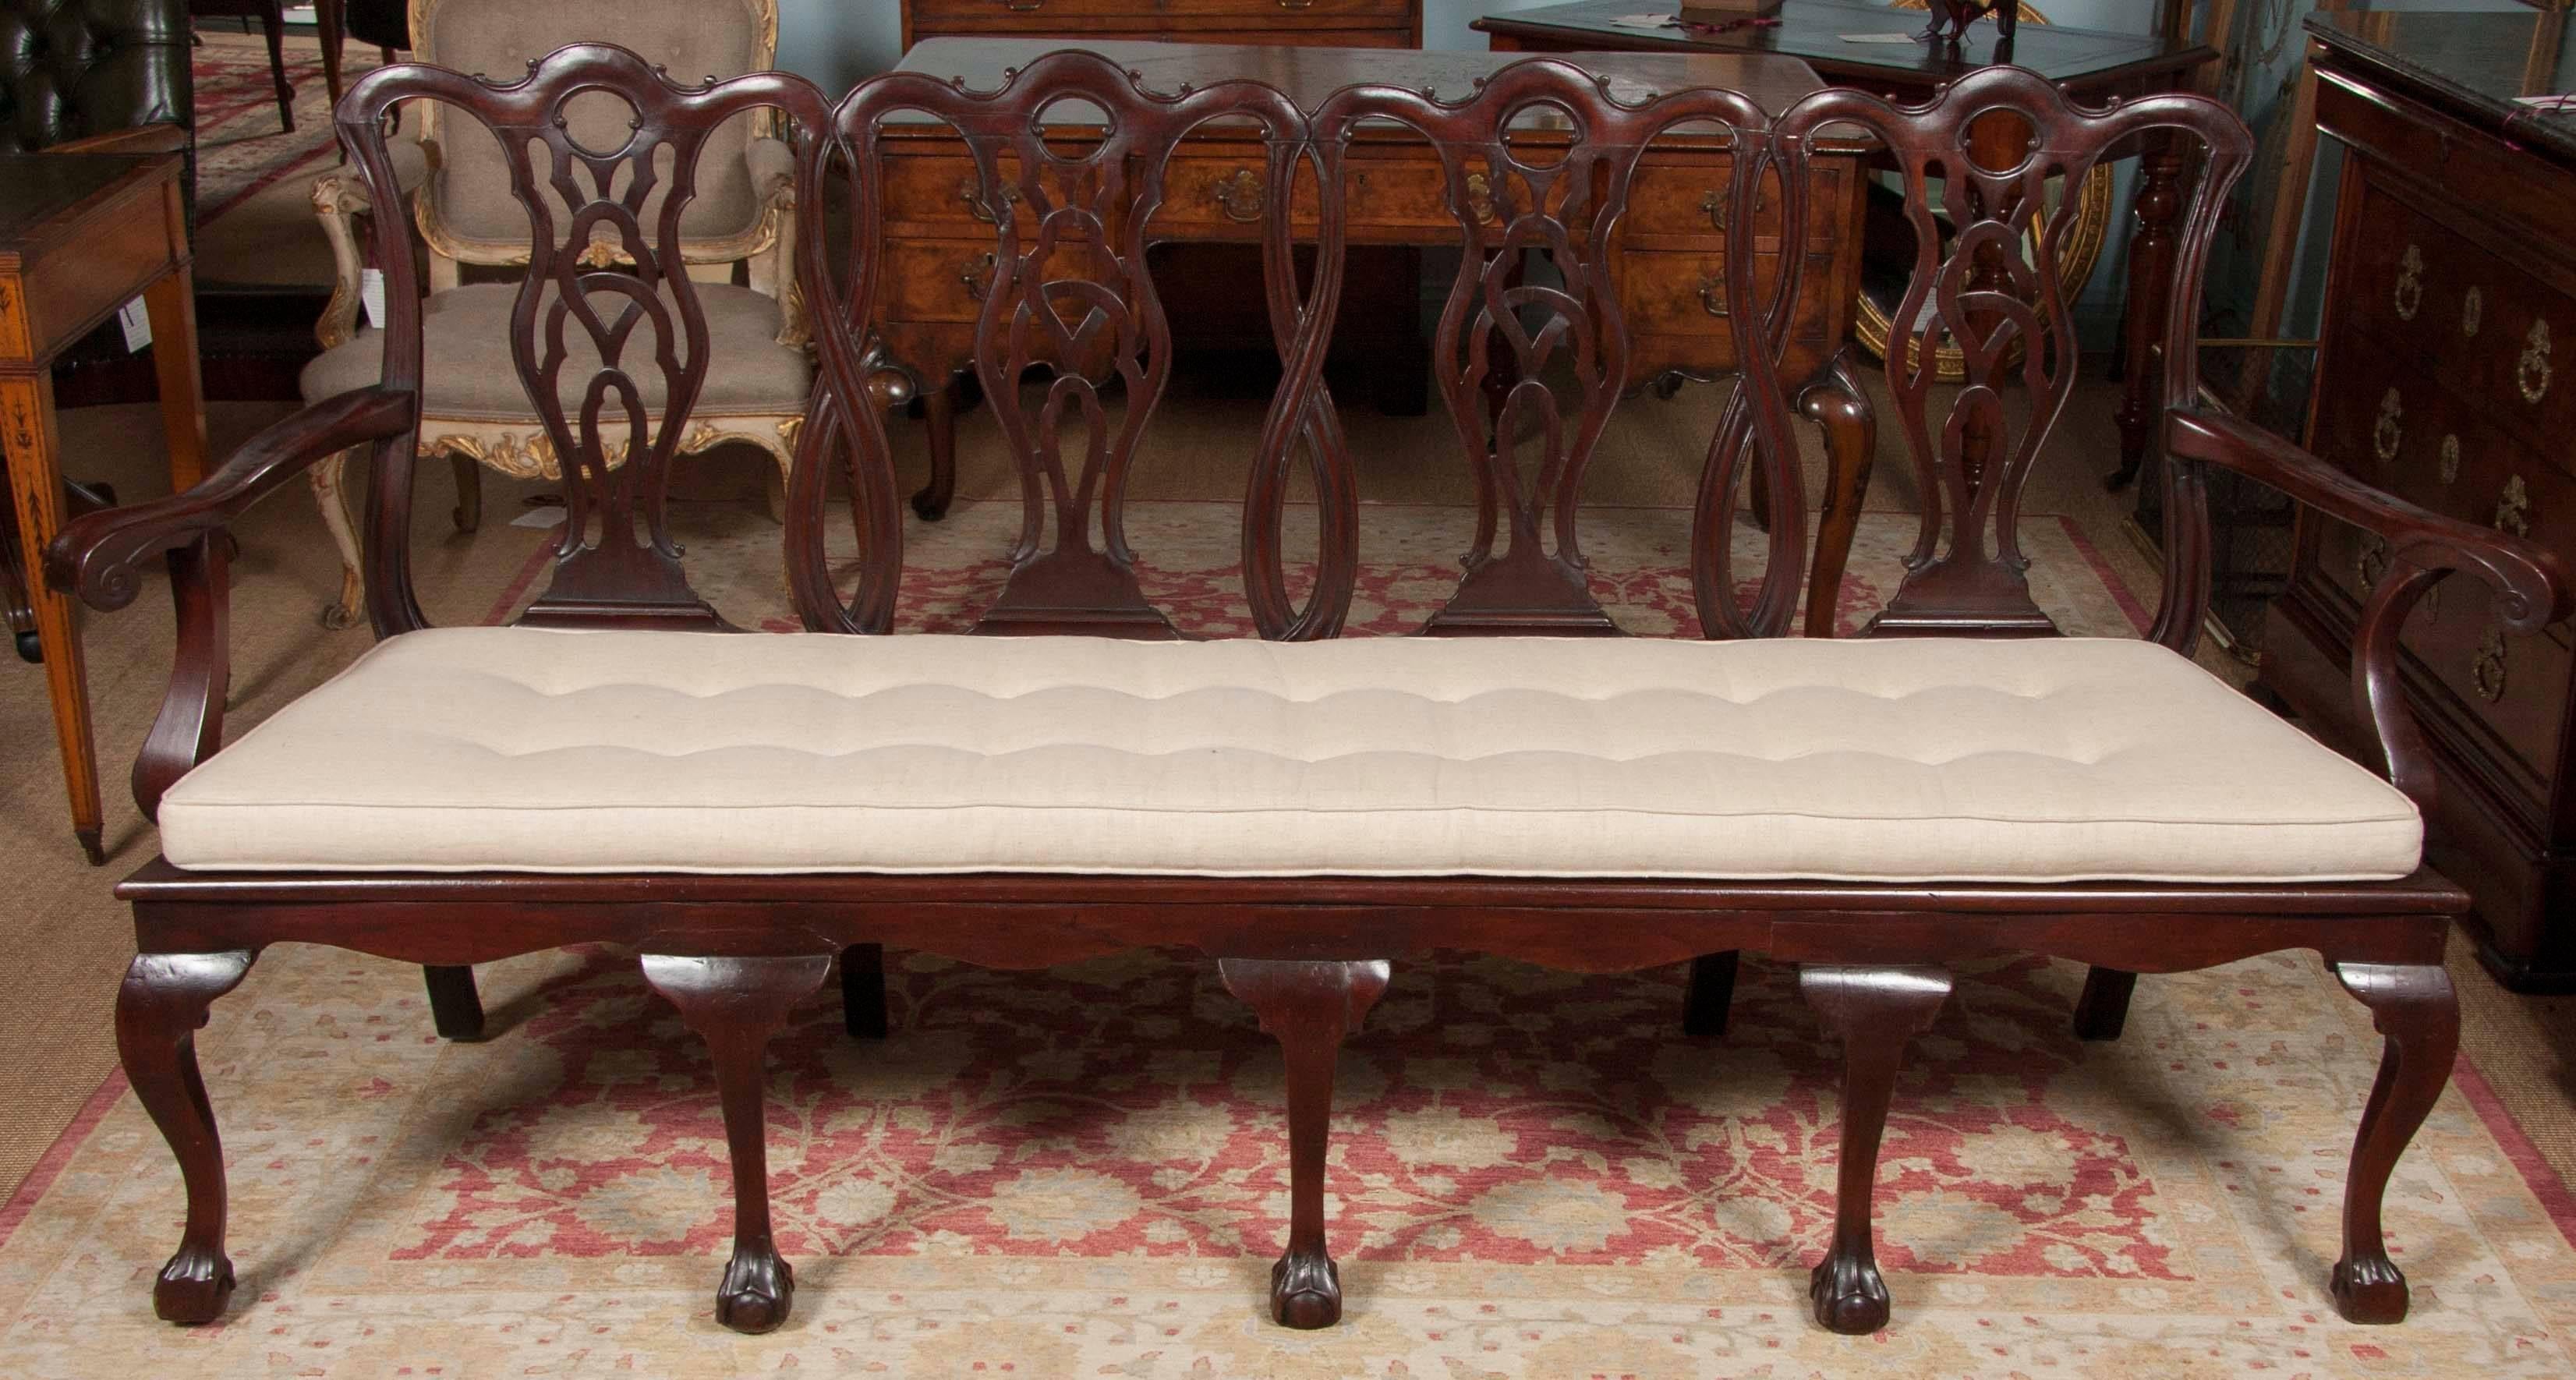 A 19th century mahogany four-seat settee with a carved open back and caned seat. The arms are shaped with scroll ends and the seat frame is mounted on cabriole legs with ball and claw feet. The cushion is later.